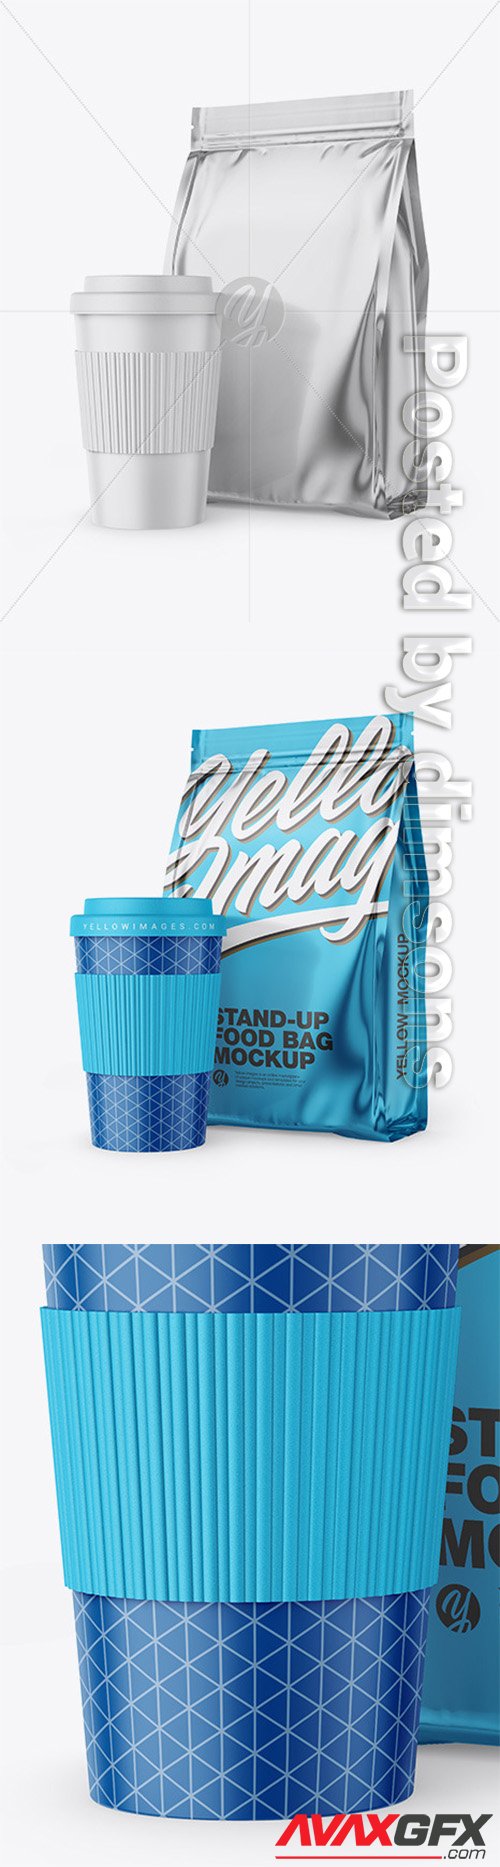 Download Metallic Coffee Bag Mockup Front View 66609 Avaxgfx All Downloads That You Need In One Place Graphic From Nitroflare Rapidgator PSD Mockup Templates